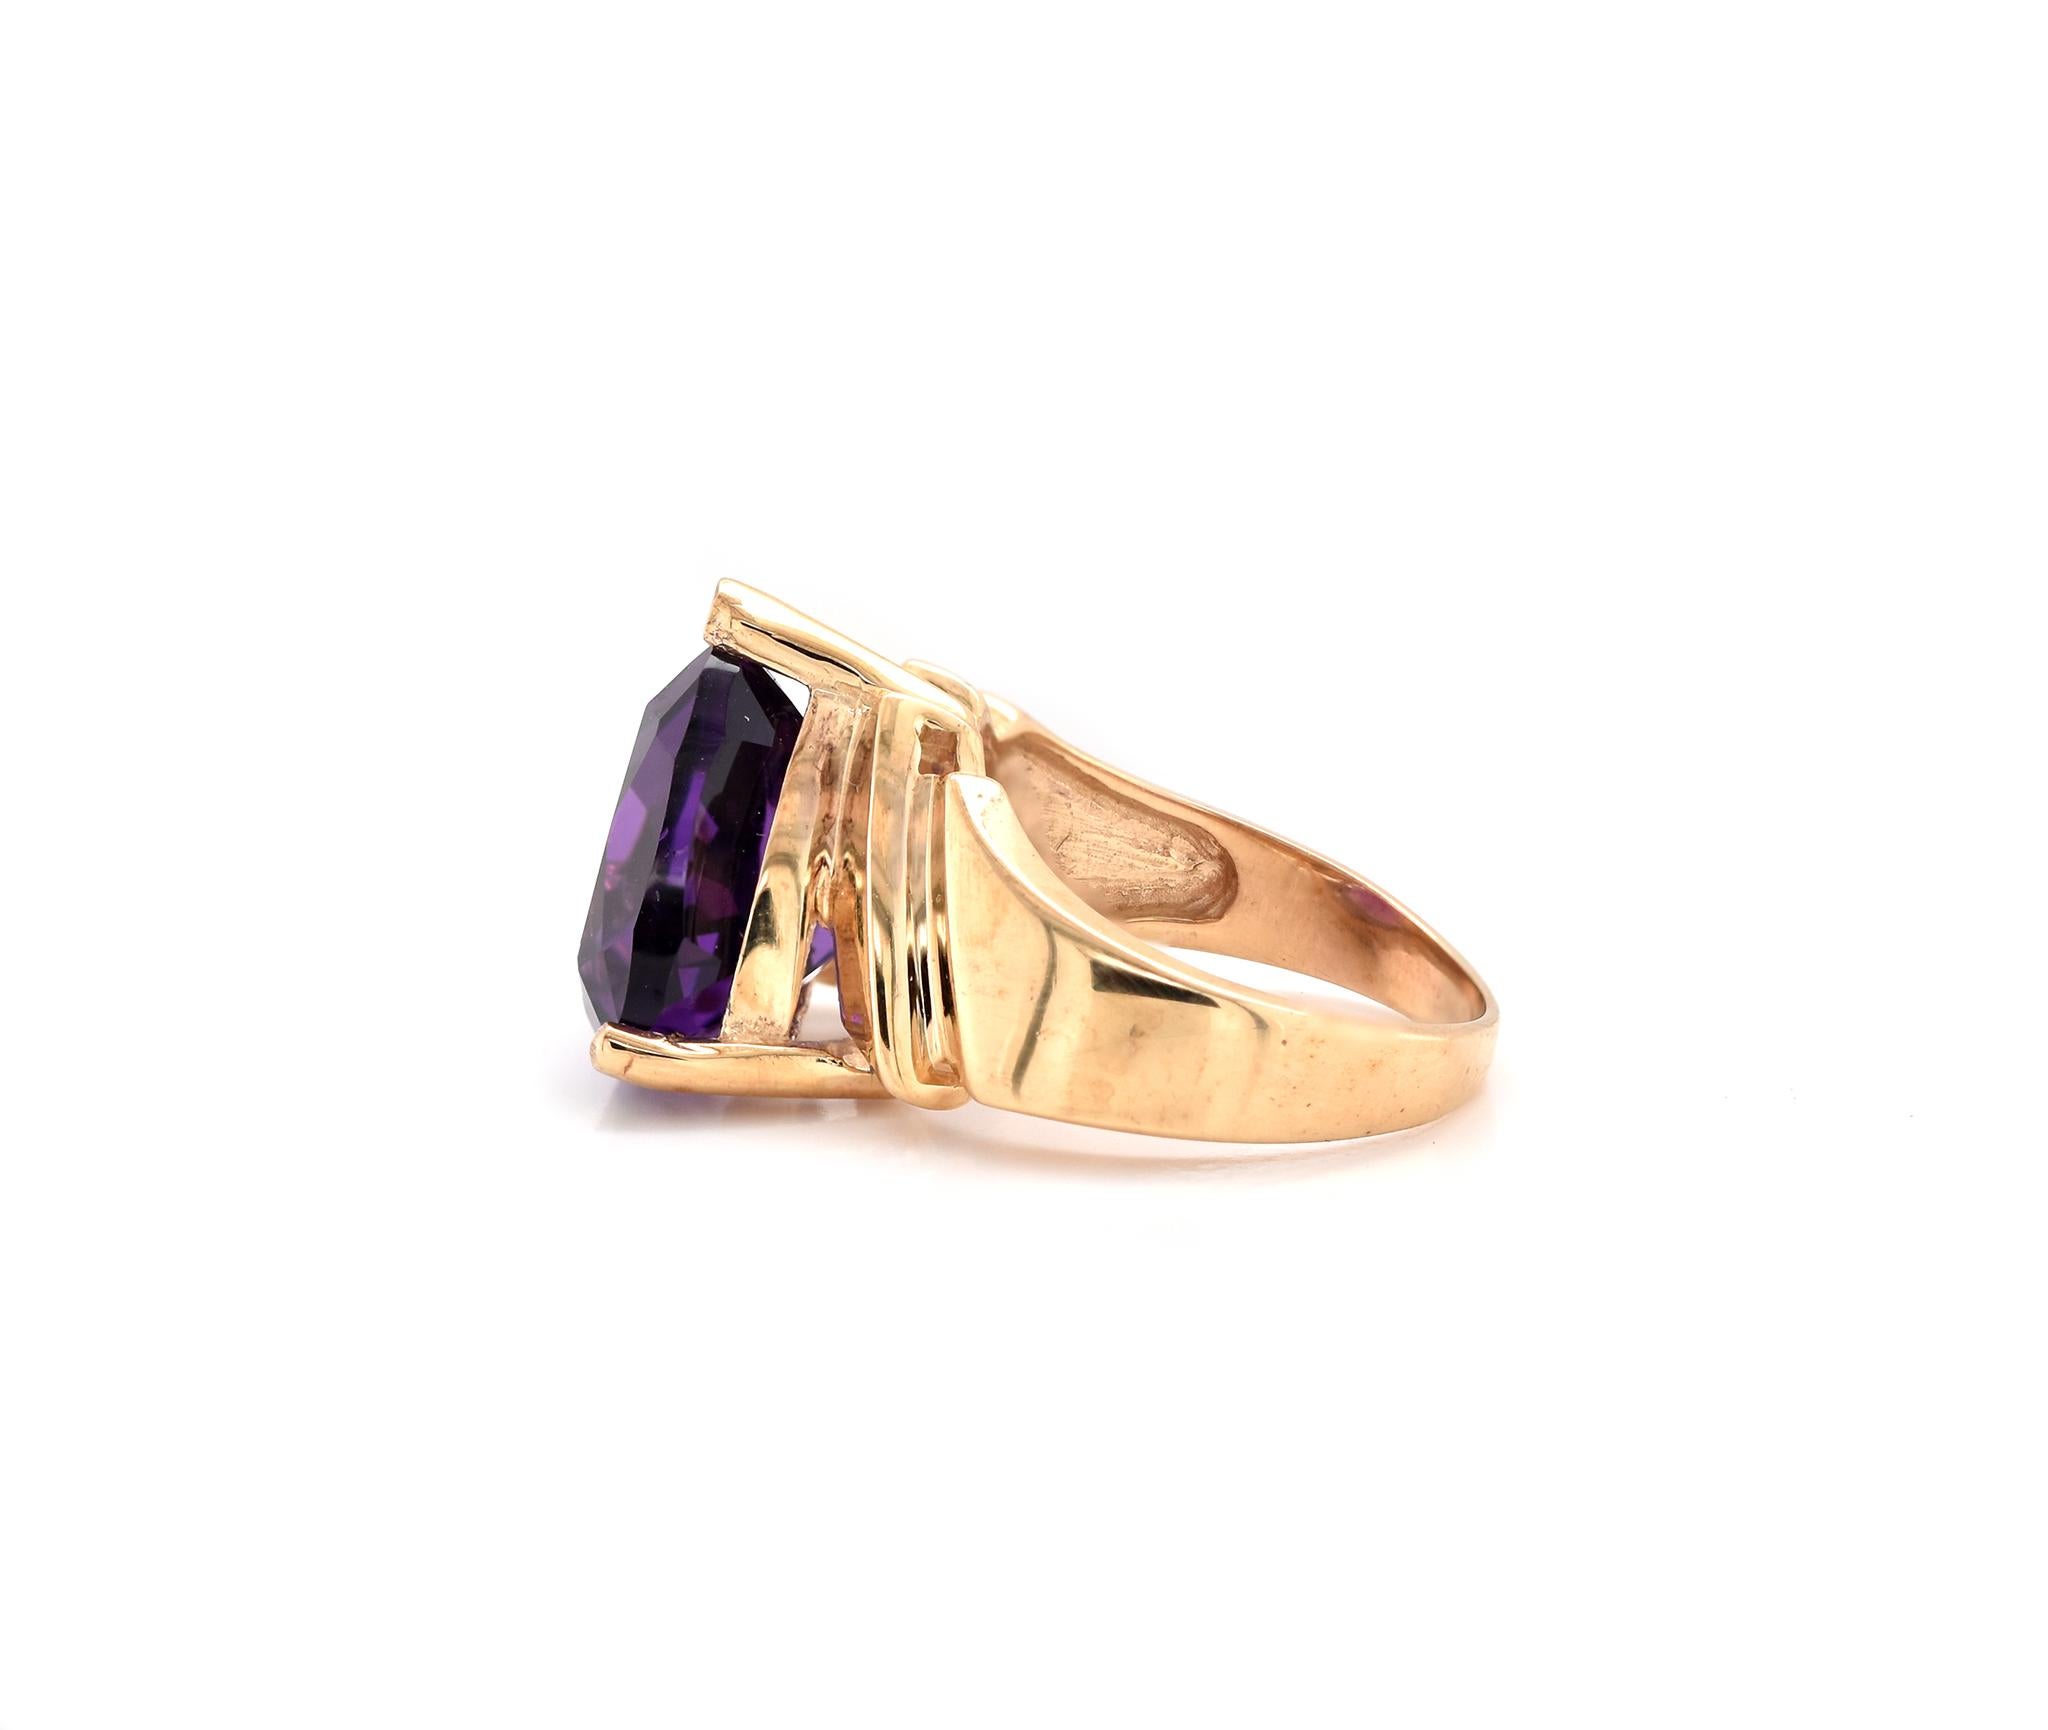 Material: 10K yellow gold
Amethyst: 1 trillion cut = 12.00ct
Ring Size: 6 (please allow up to 2 additional business days for sizing requests)
Dimensions: ring top measures 14.05mm wide
Weight: 5.66 grams
